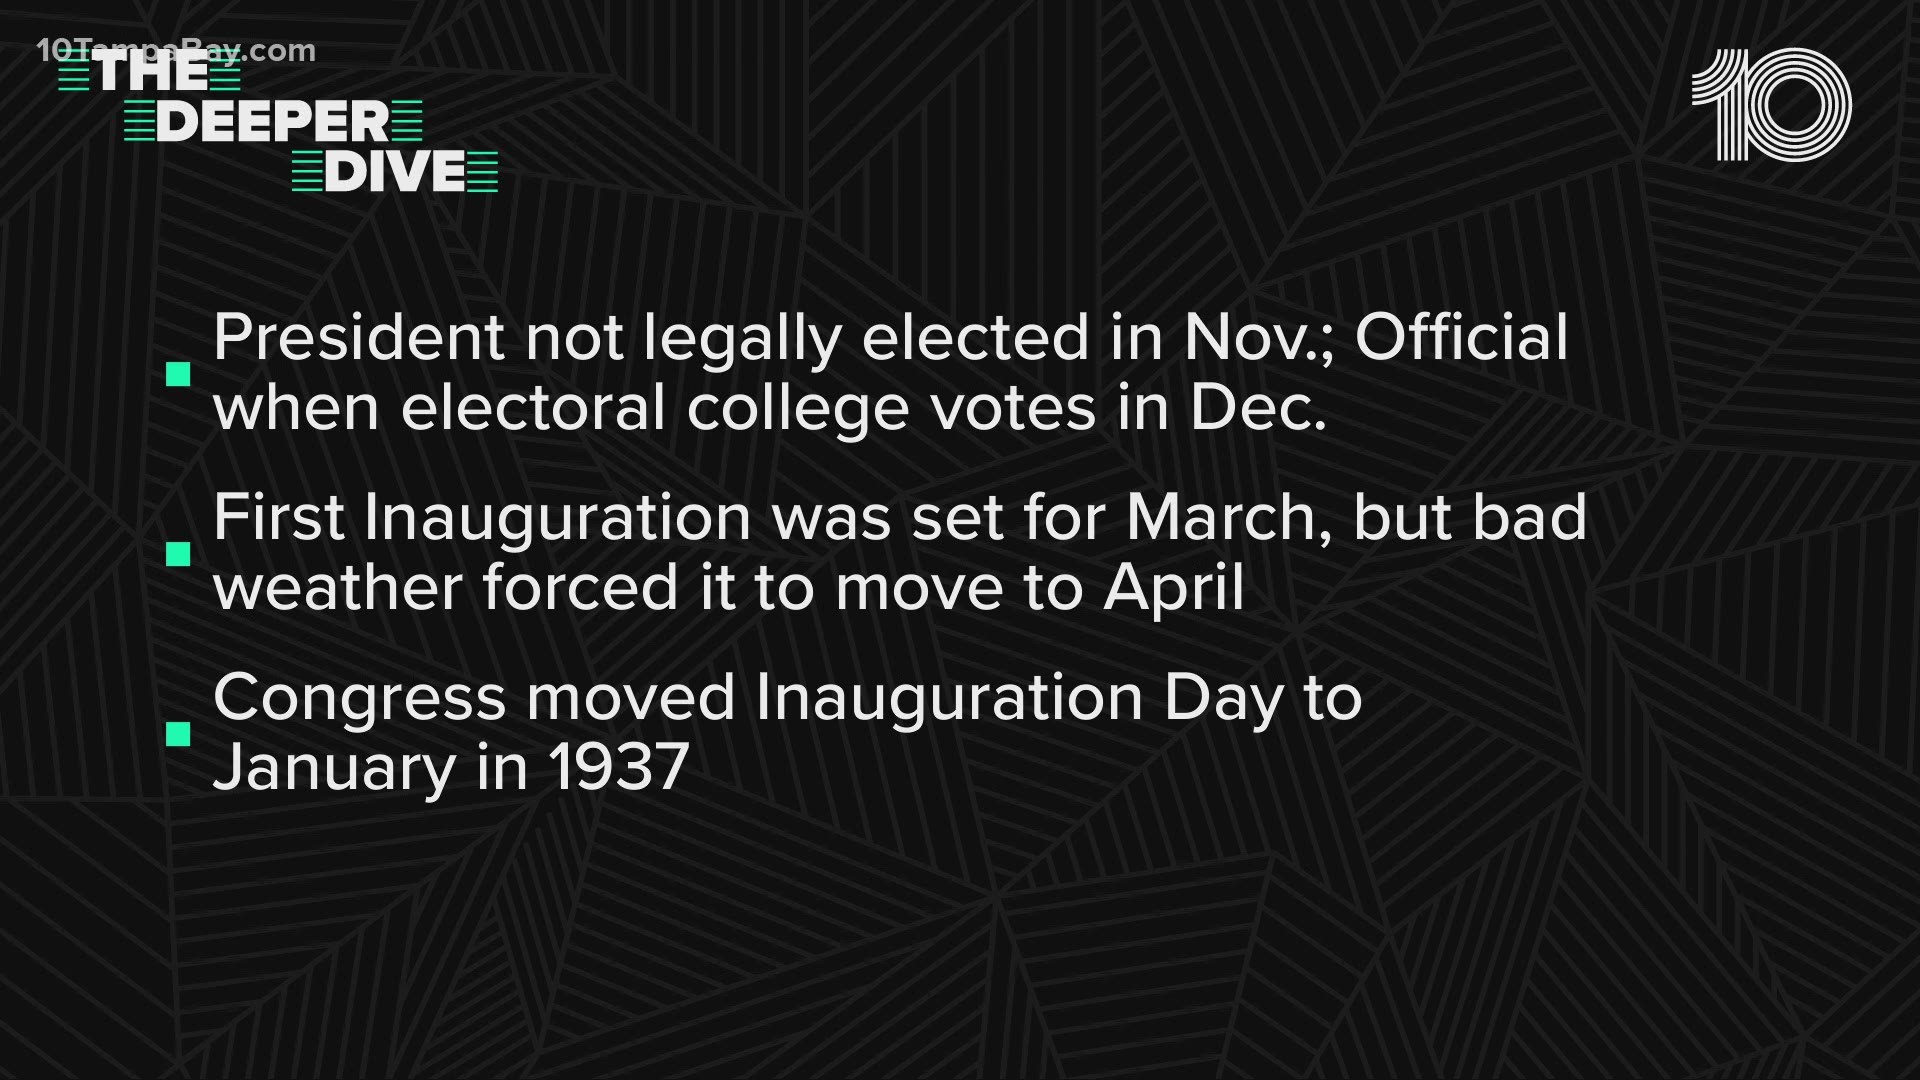 Next week's Presidential Inauguration will see some major changes.